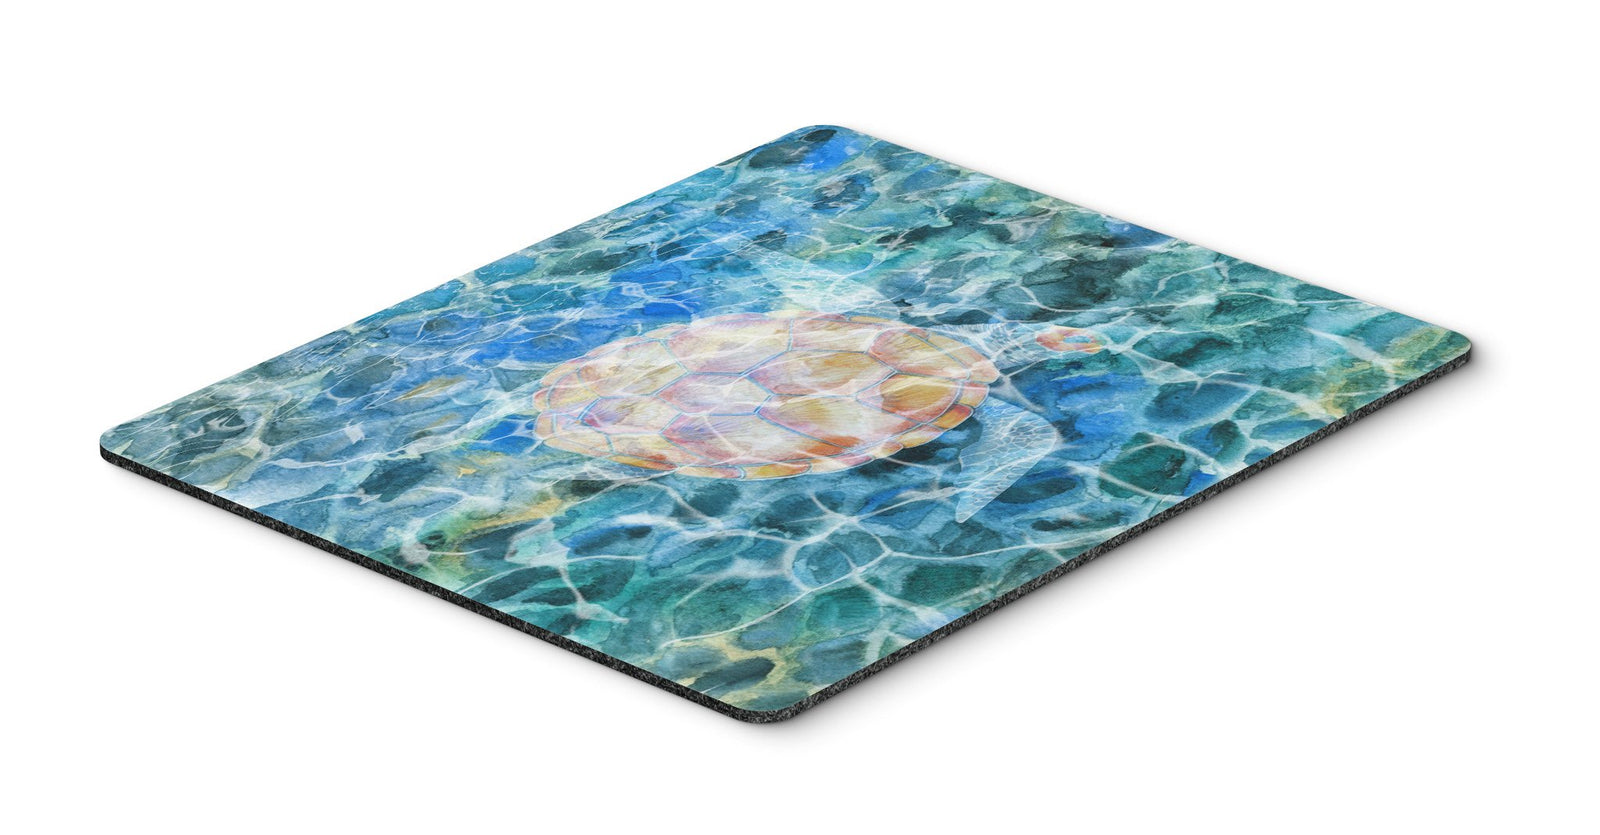 Sea Turtle Under water Mouse Pad, Hot Pad or Trivet BB5363MP by Caroline's Treasures